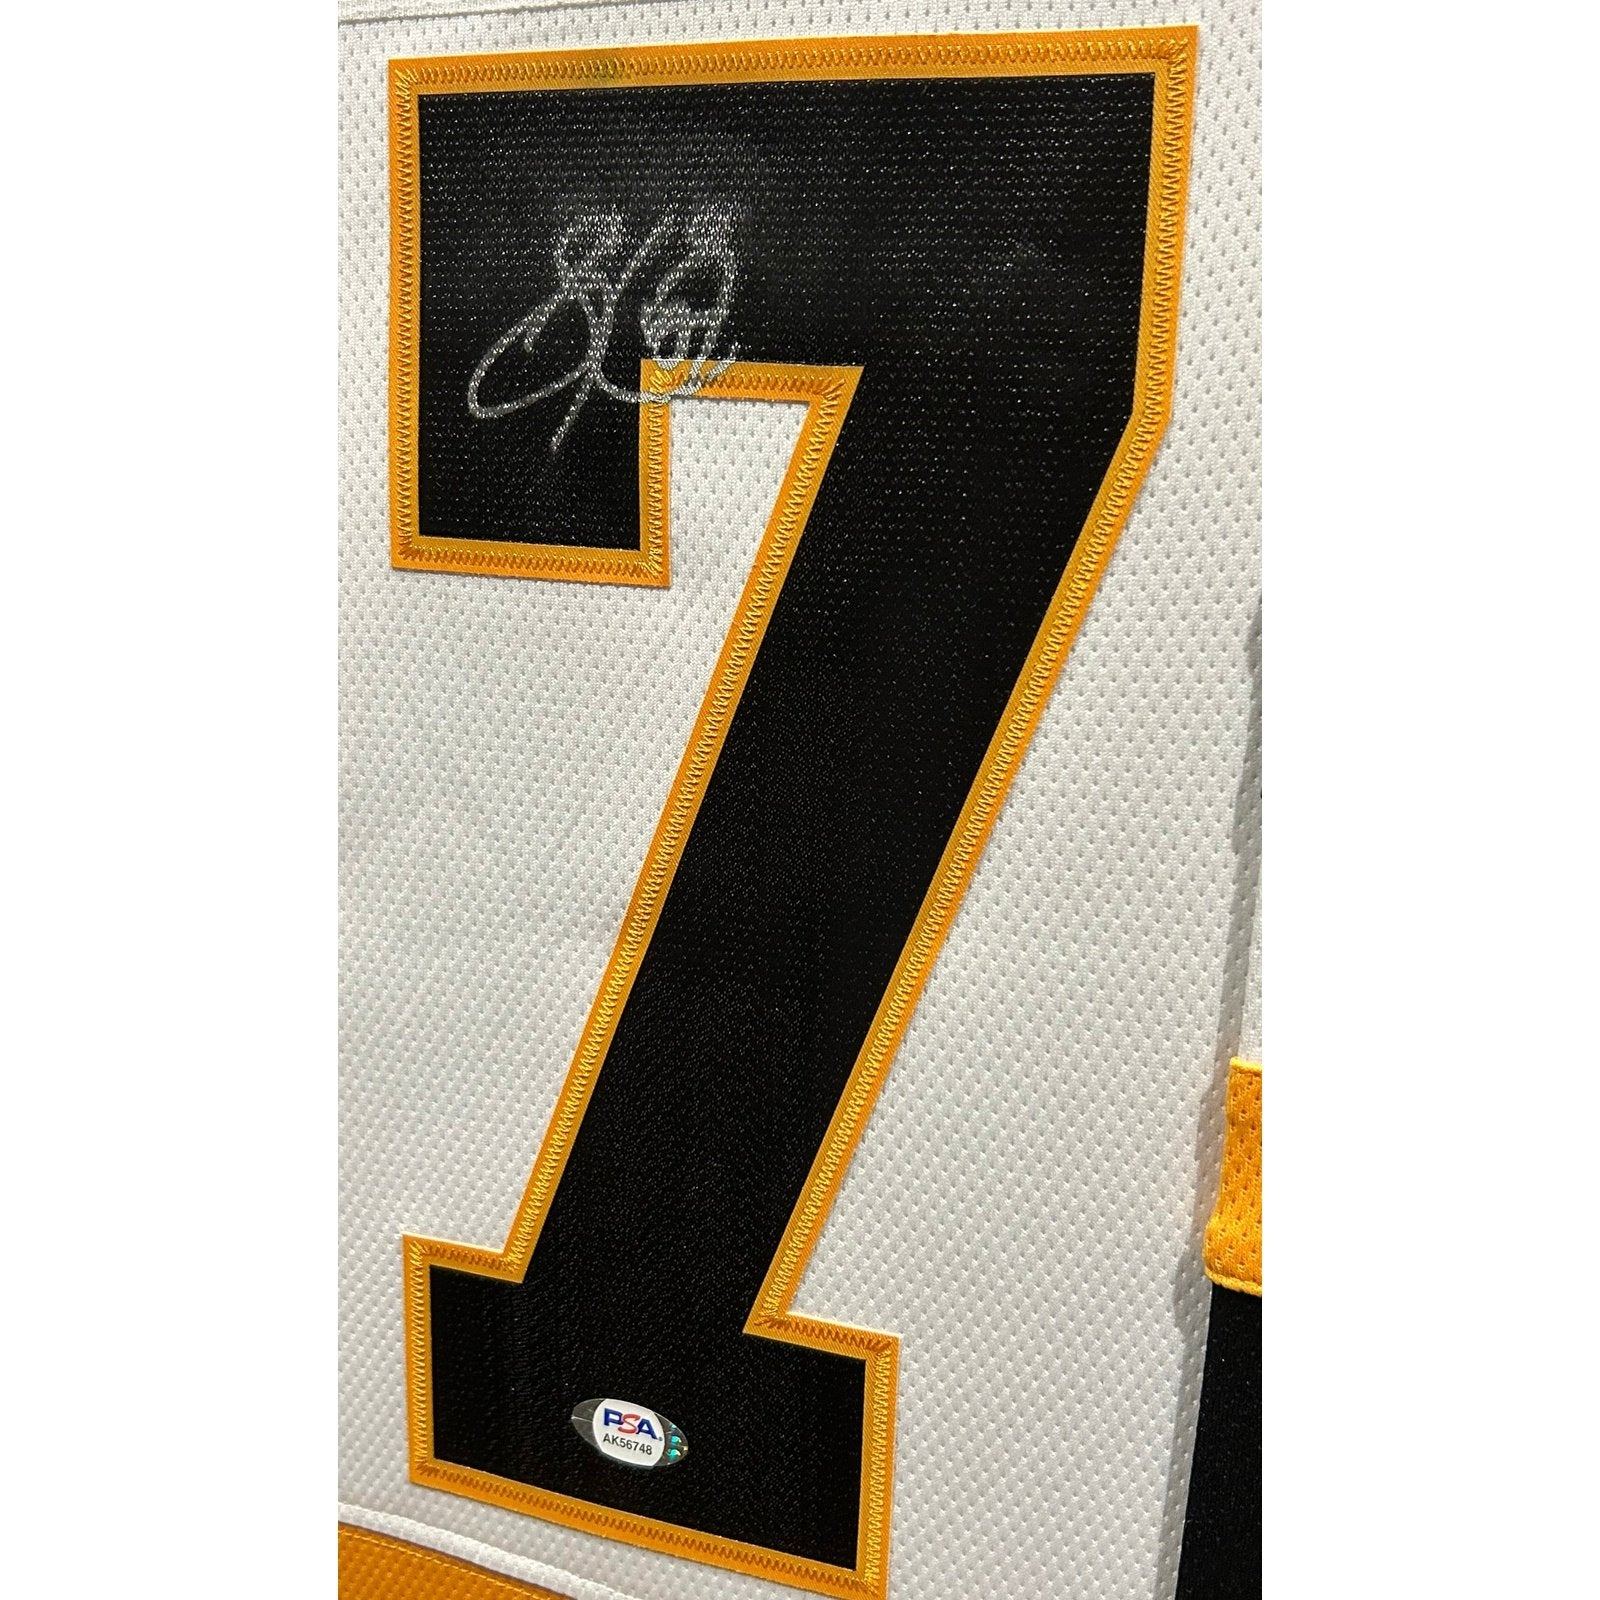 sidney crosby signed jersey